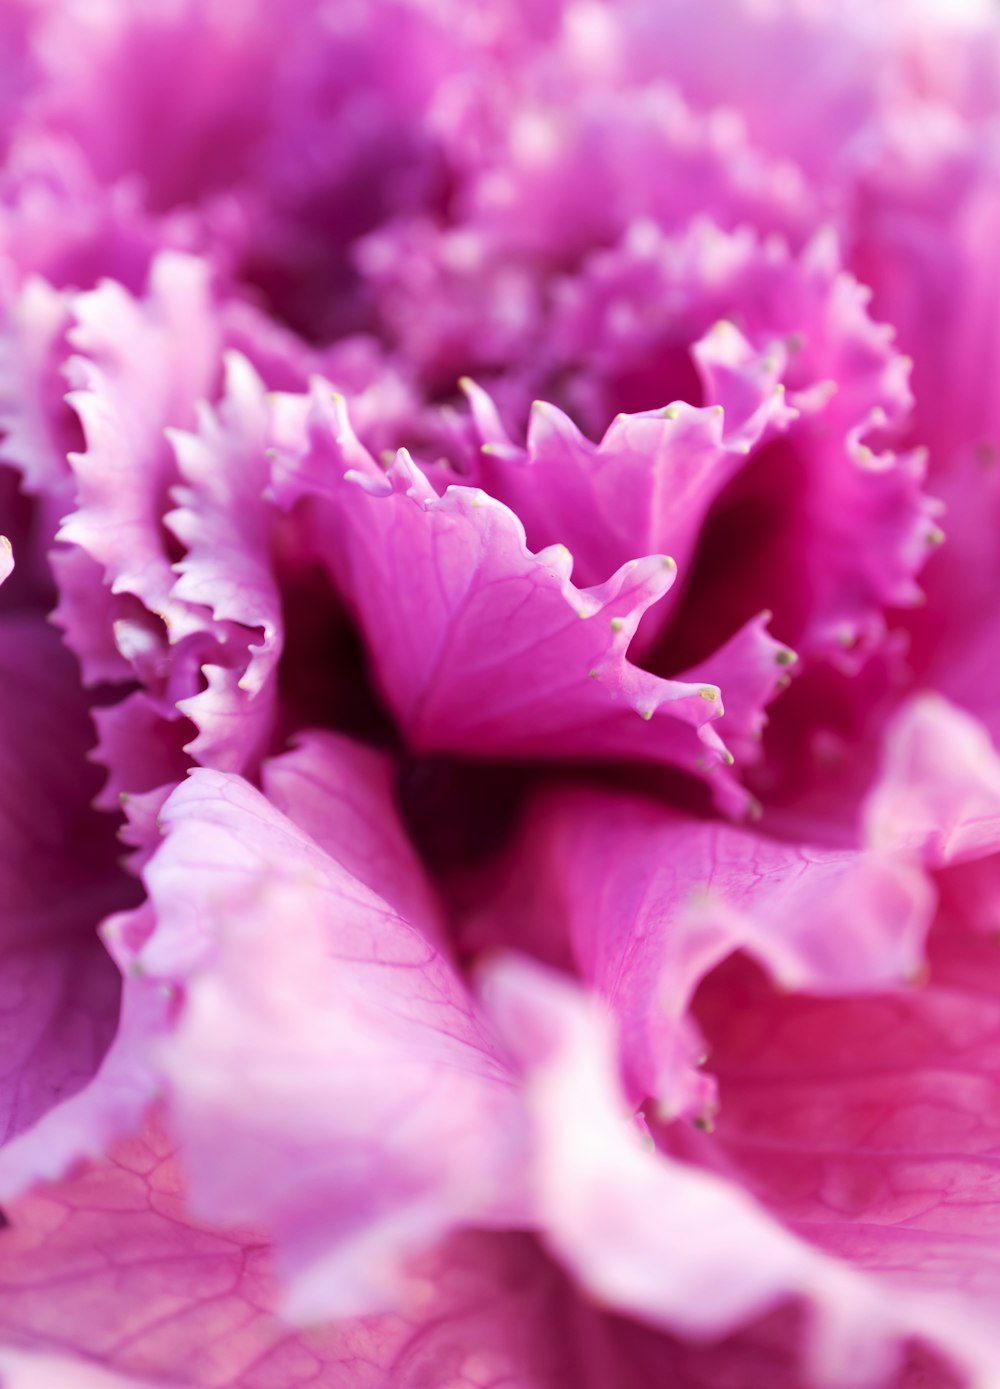 purple flower petals in close up photography